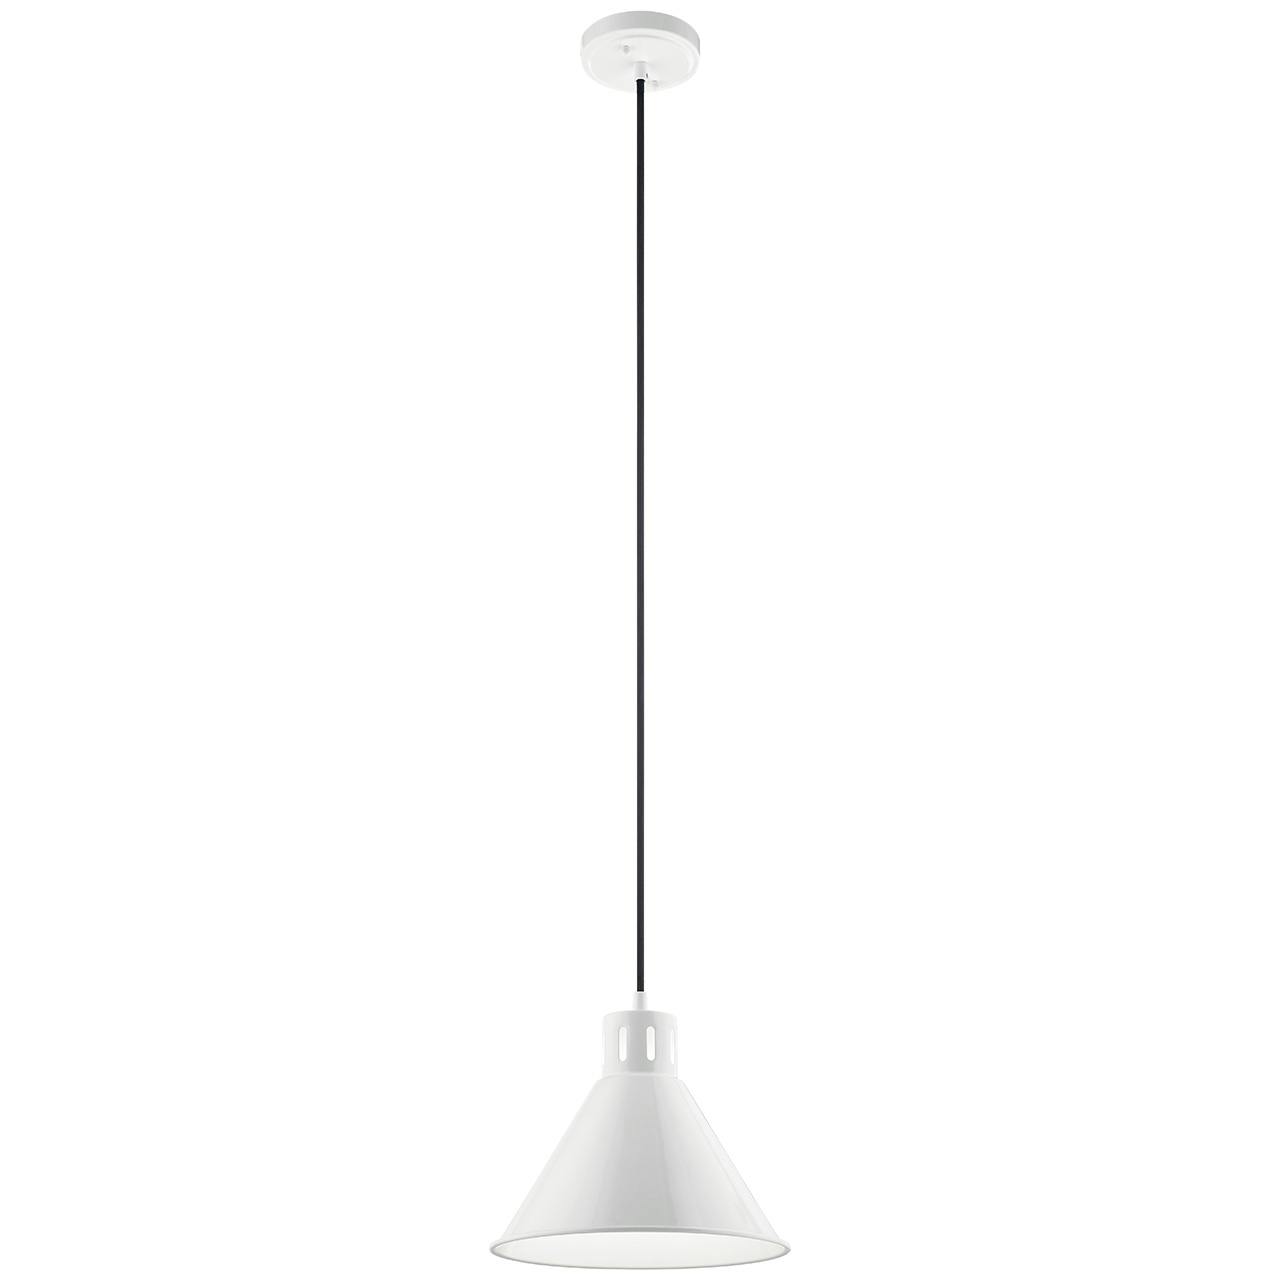 Zailey™ 9.5" 1 Light Pendant in White on a white background